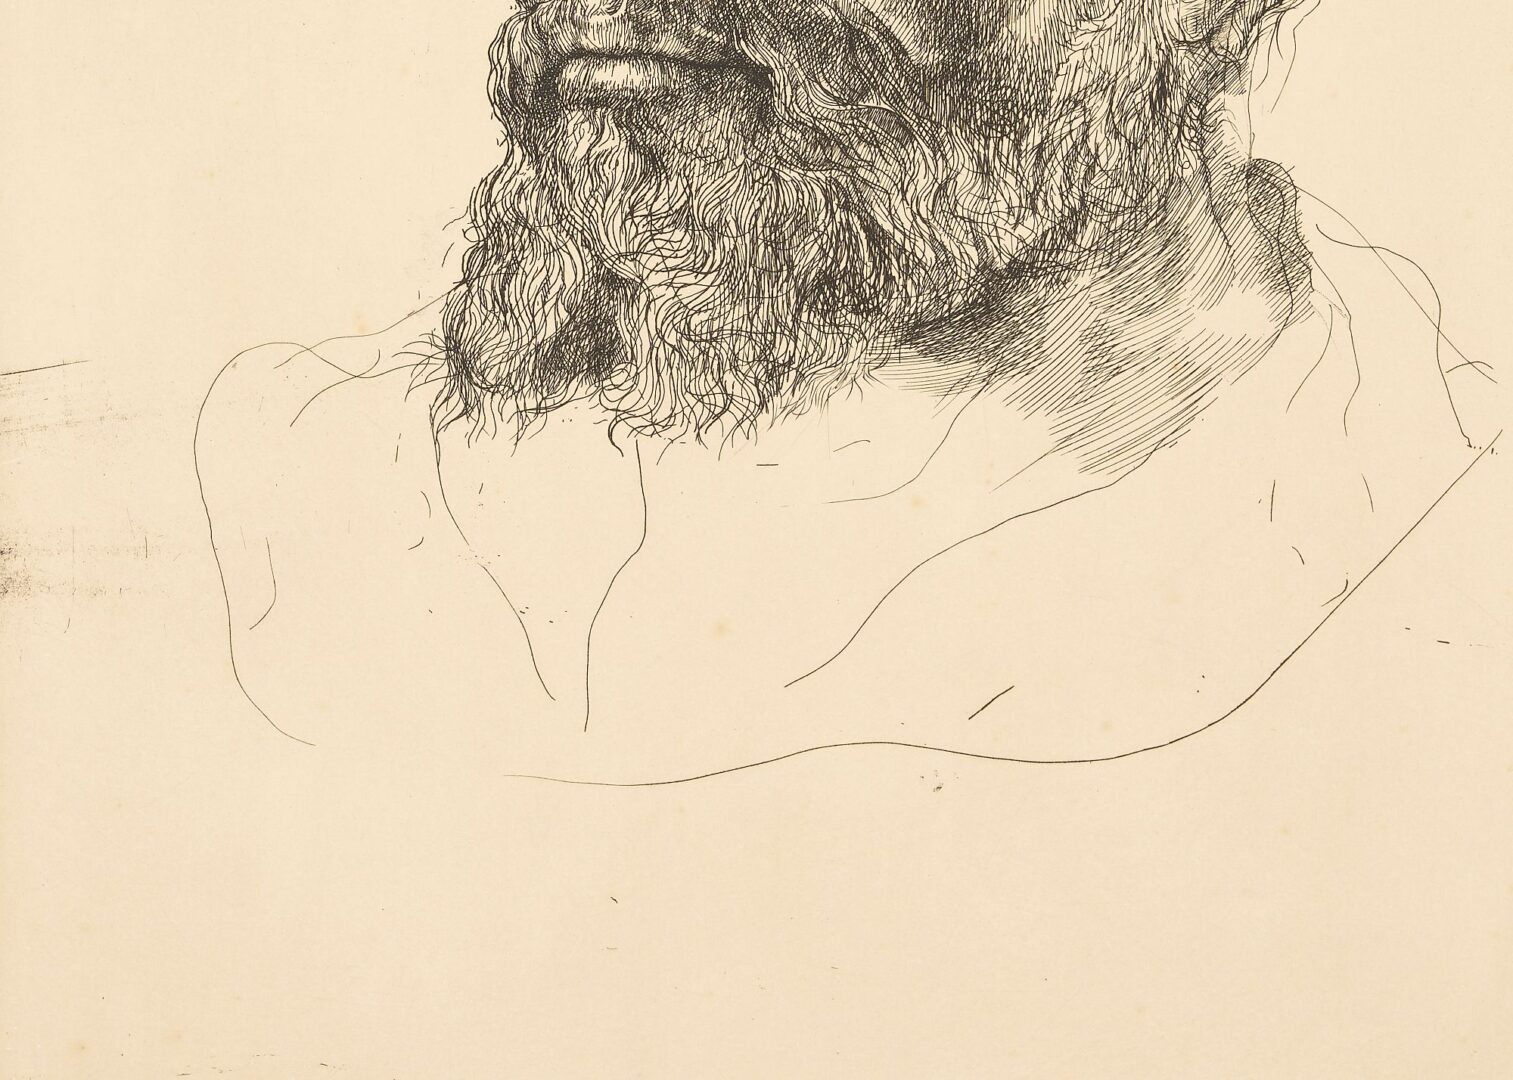 Lot 915: 2 Drawings: Raphael Soyer Nude, Circus, Plus 1 Portrait Etching of Michelangelo